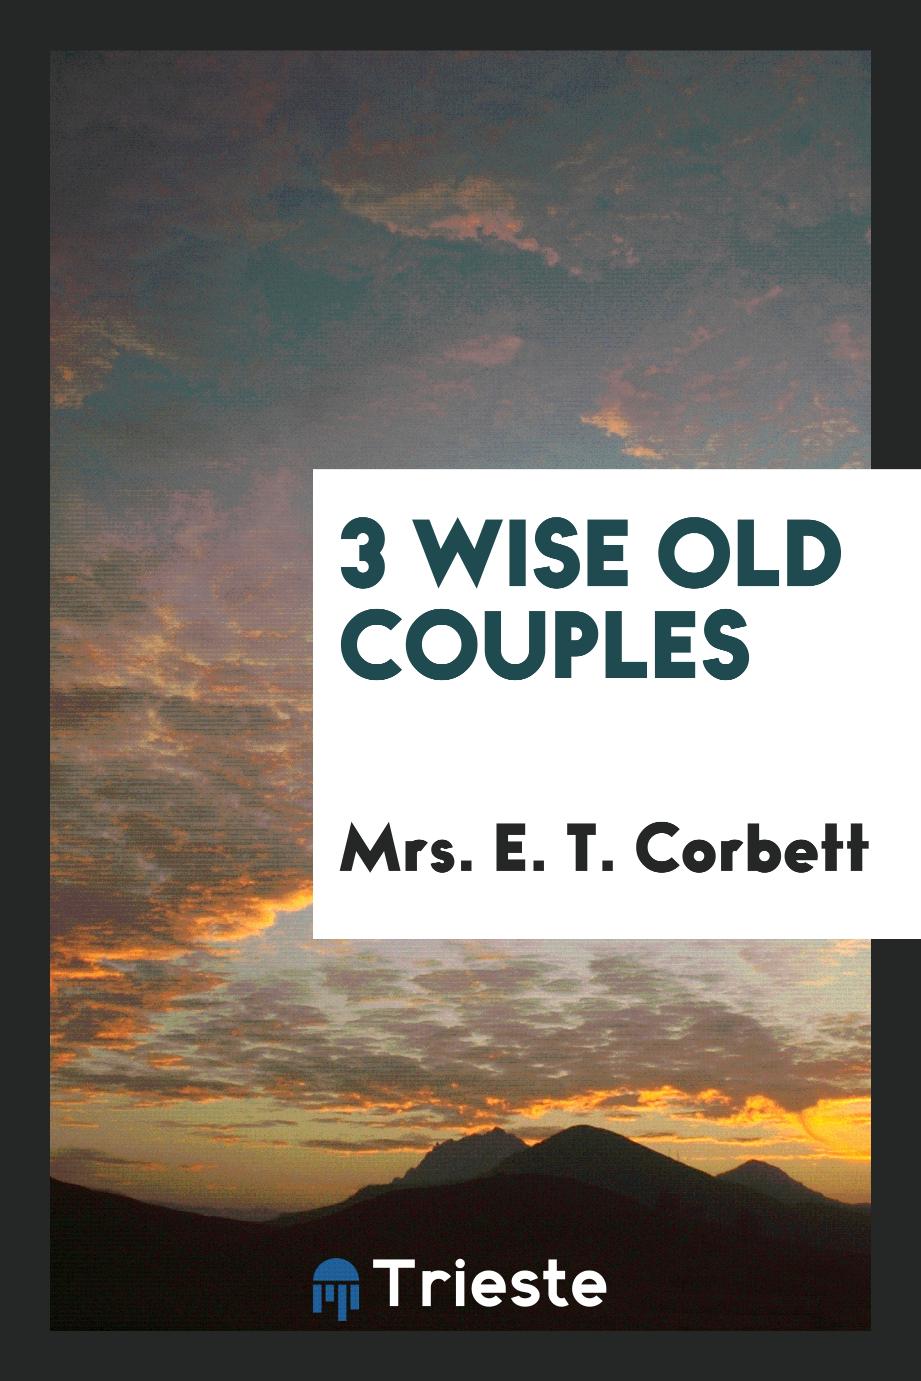 3 wise old couples